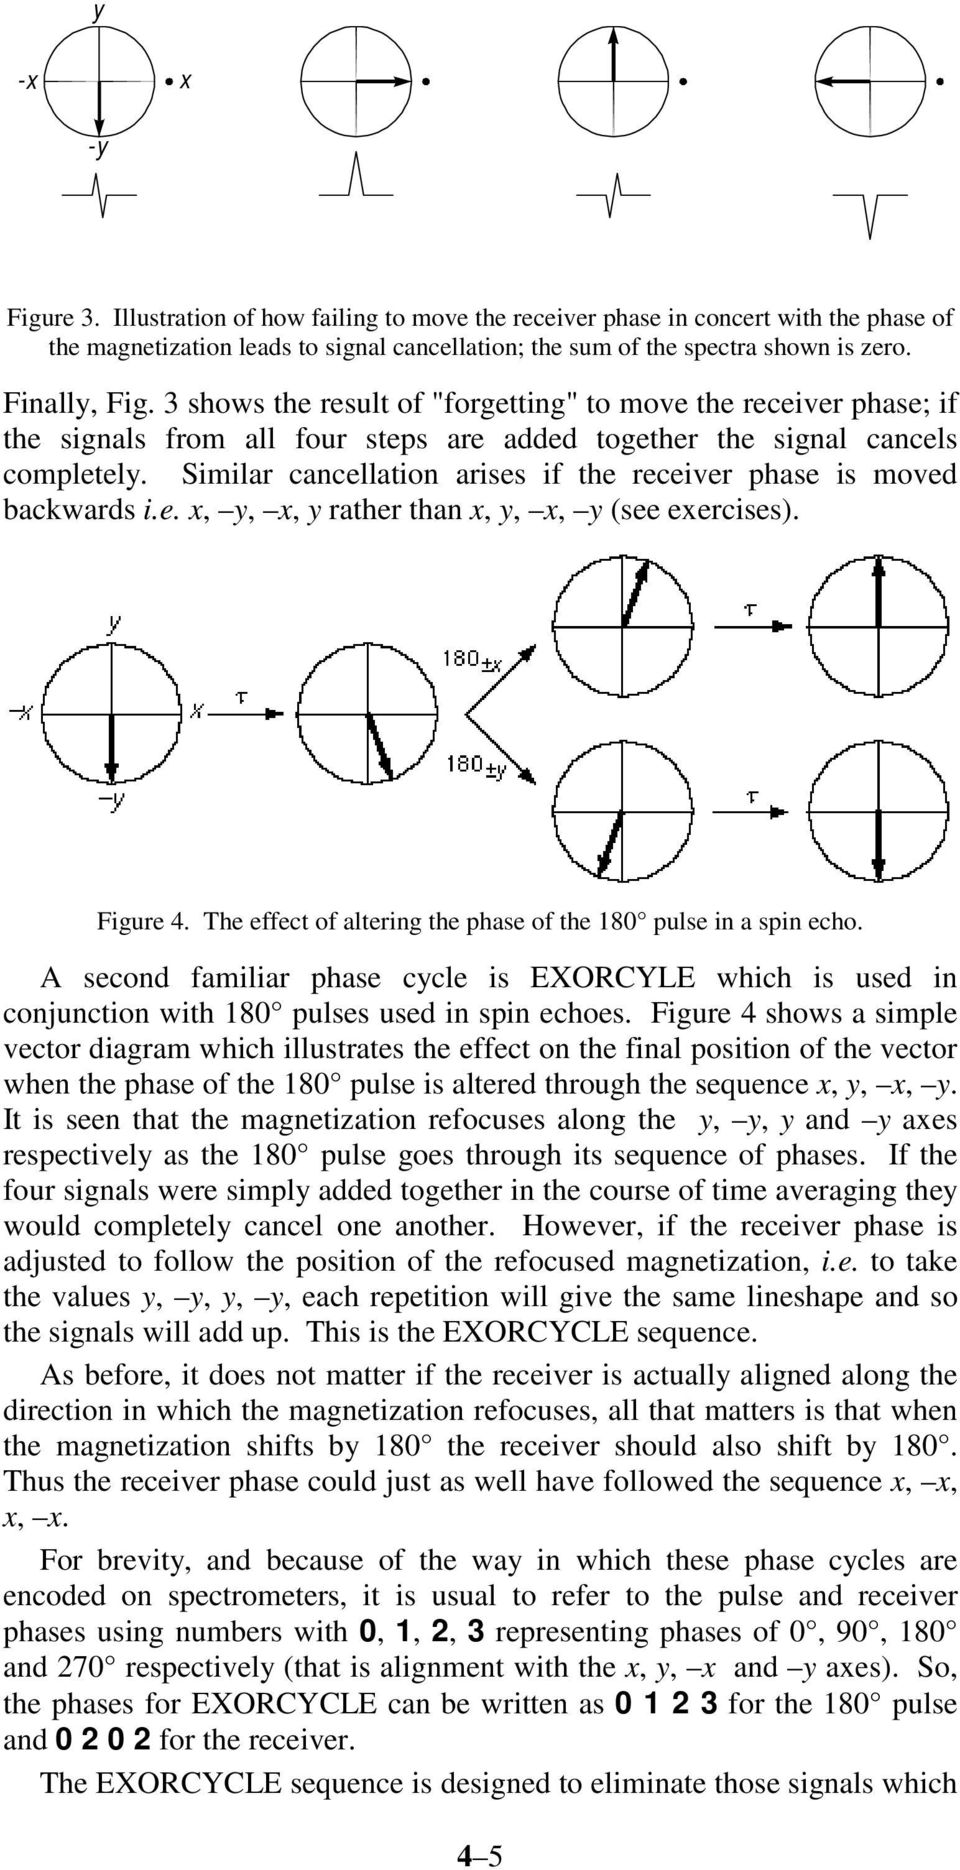 Similar cancellation arises if the receiver phase is moved backwards i.e. x, y, x, y rather than x, y, x, y (see exercises). Figure 4. The effect of altering the phase of the 80 pulse in a spin echo.